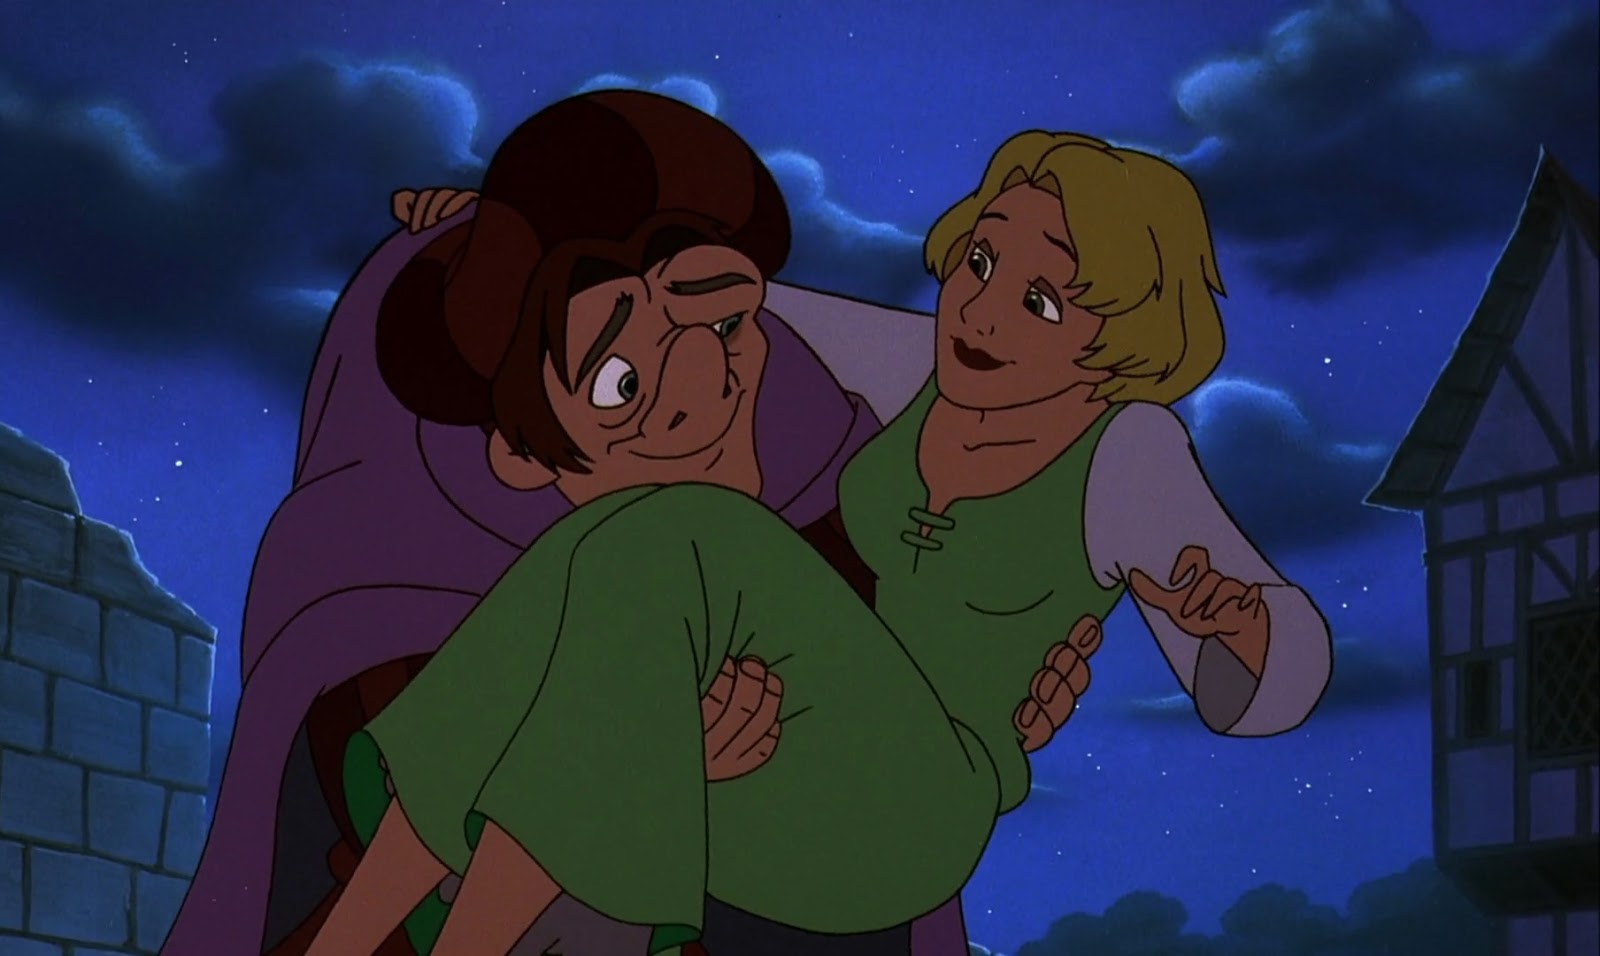 Undervalued Classics: The Hunchback of Notre Dame.